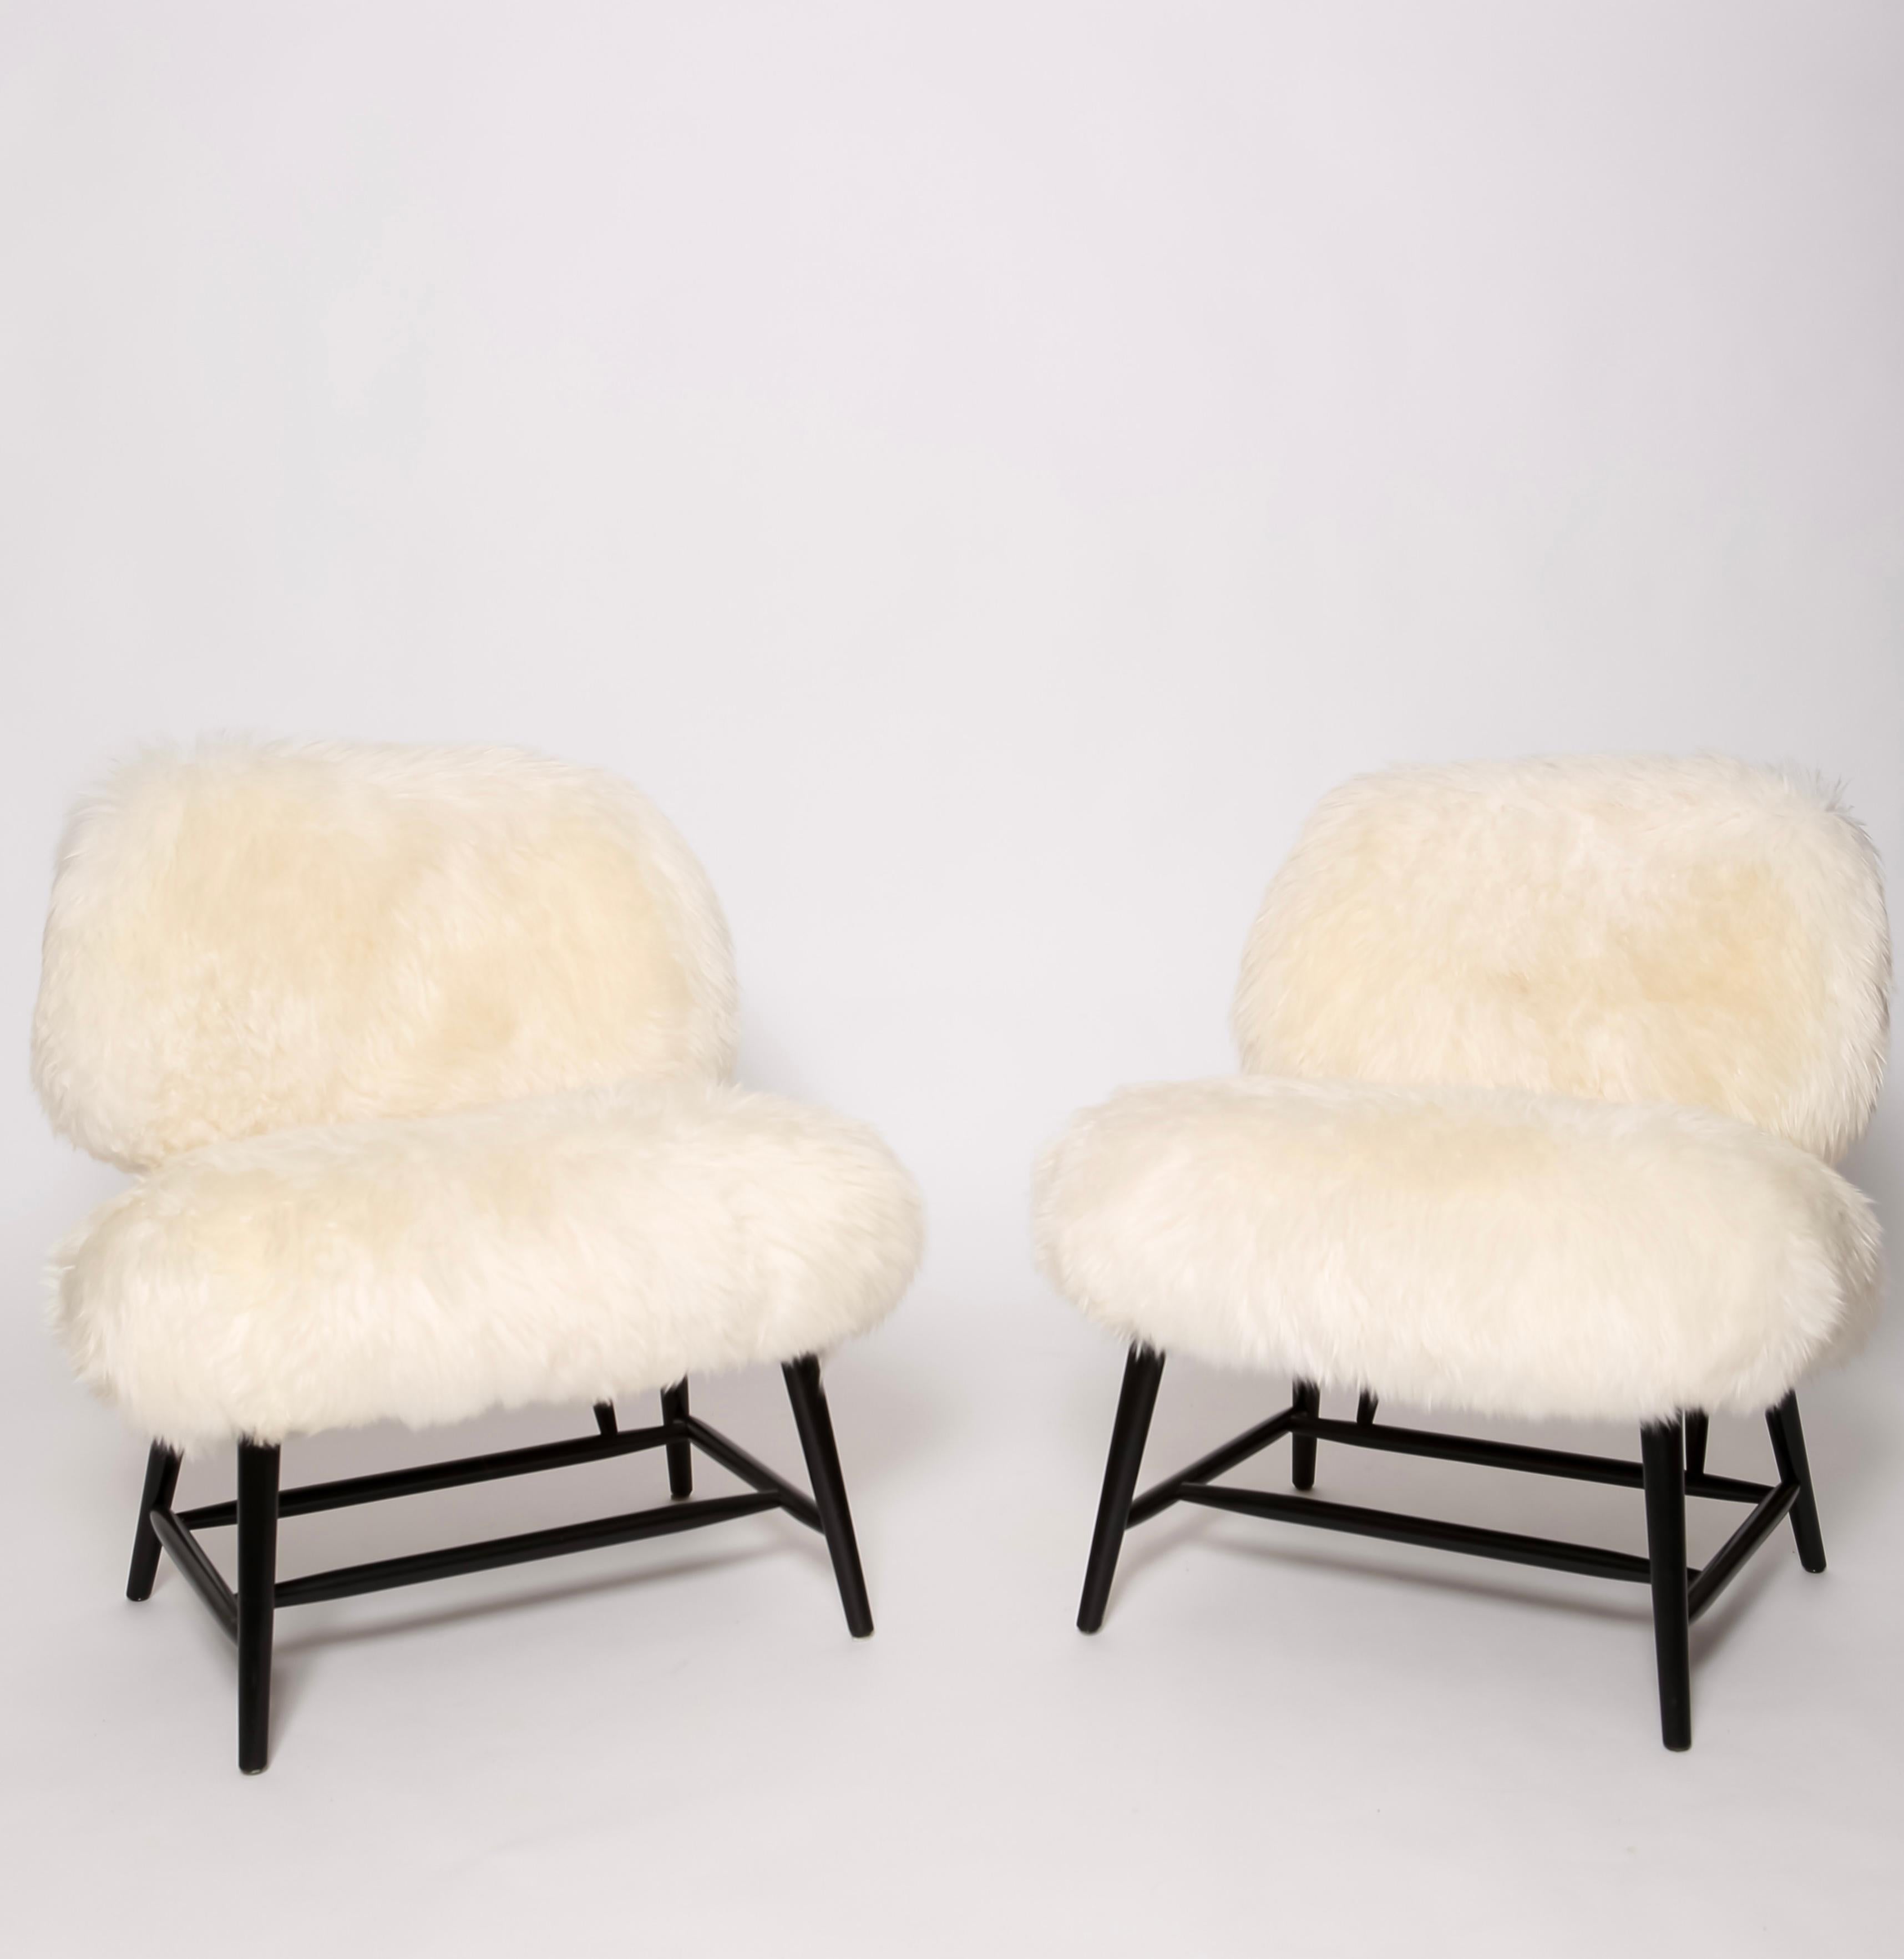 Lacquer TeVe Chairs, a Pair by Alf Svensson in shearling